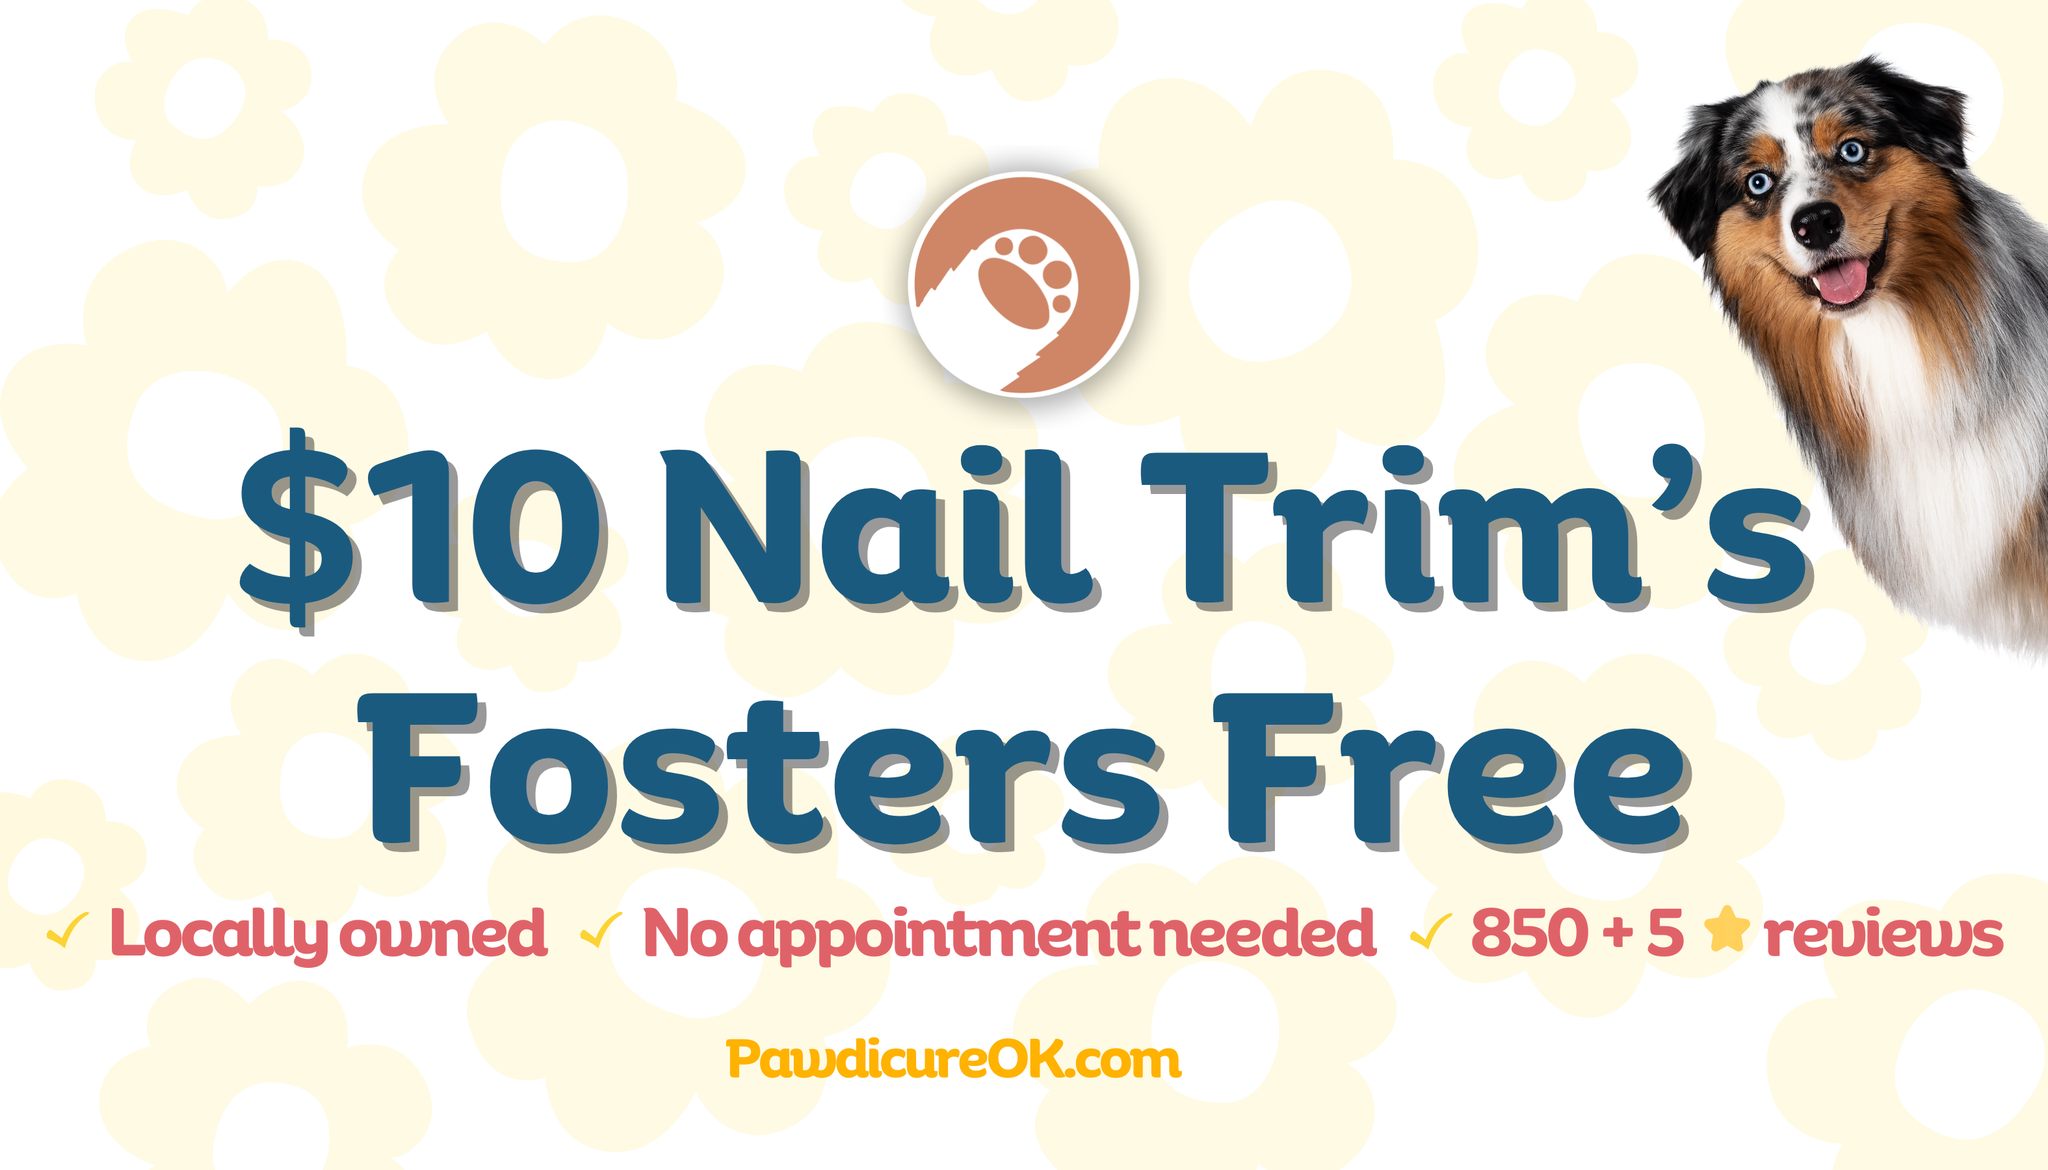 $10 nail trim's fosters free. PawdicureOK.com locally owned, no appointment needed, 850 plus 5 star reviews.